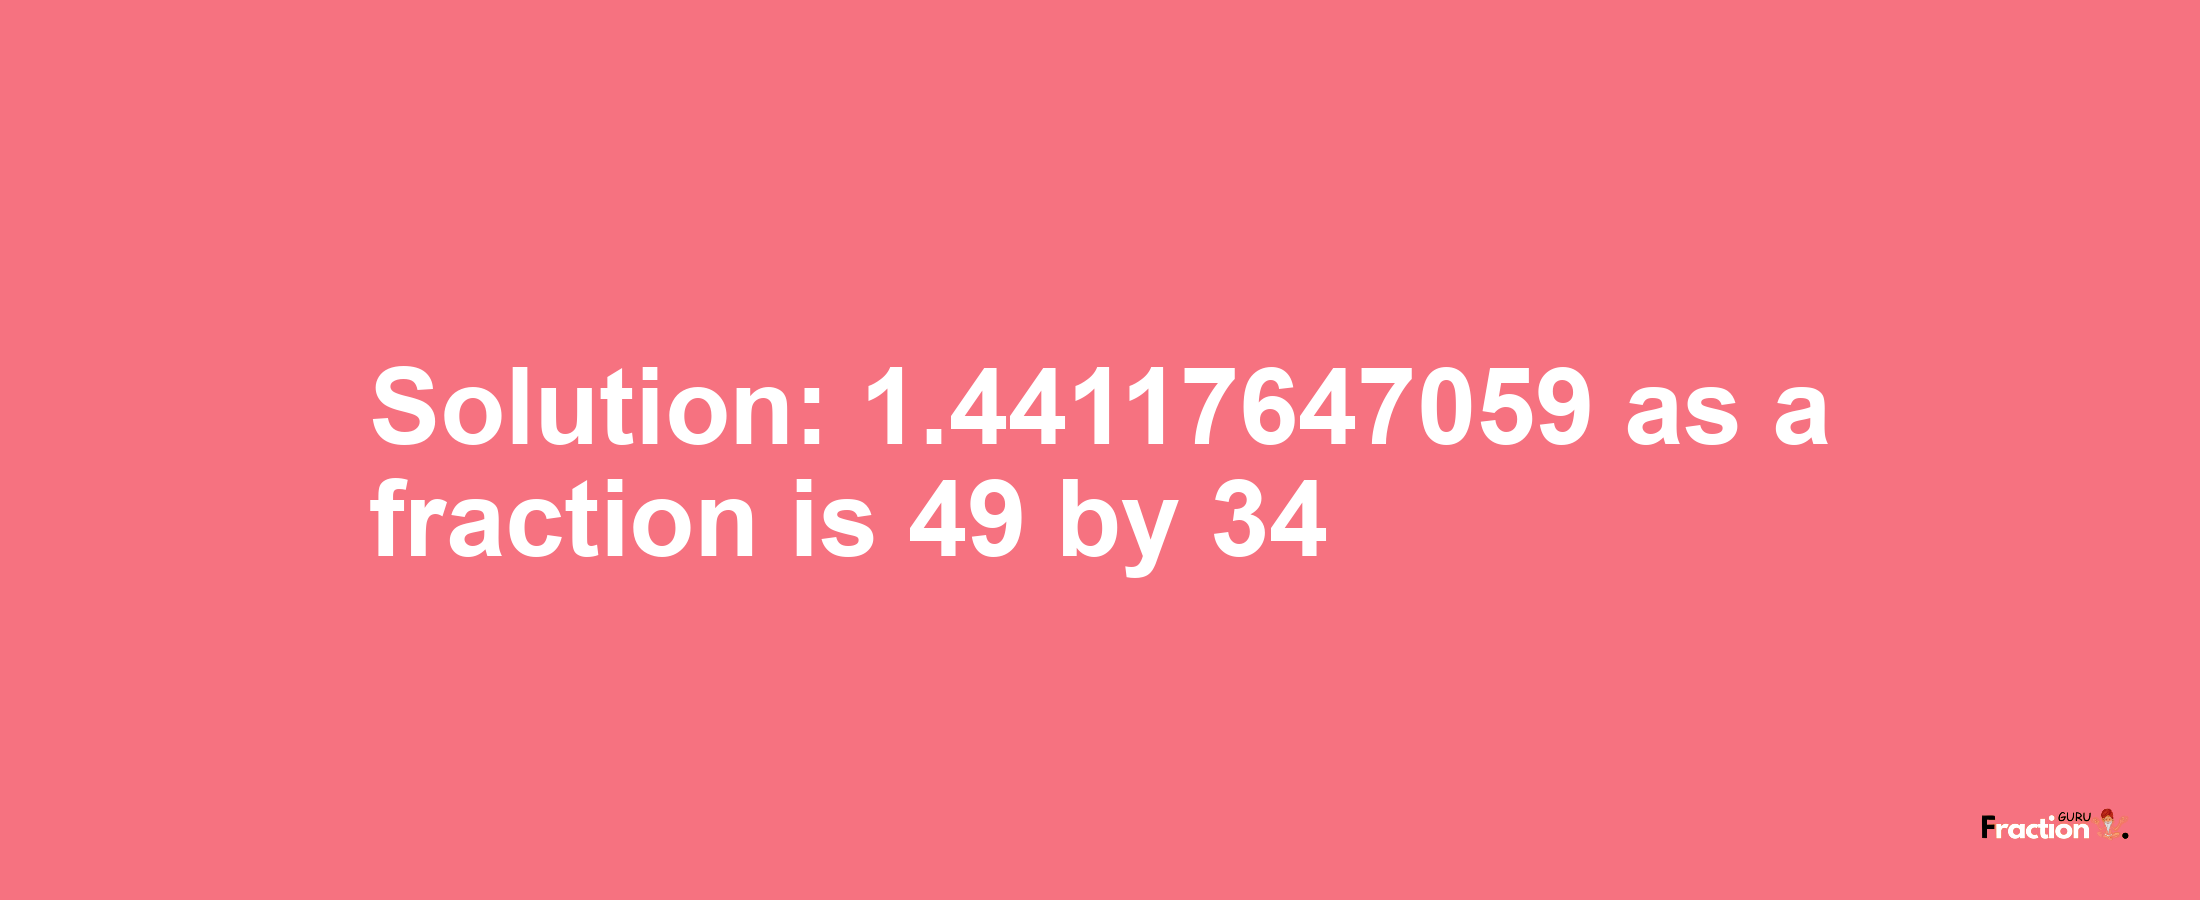 Solution:1.44117647059 as a fraction is 49/34